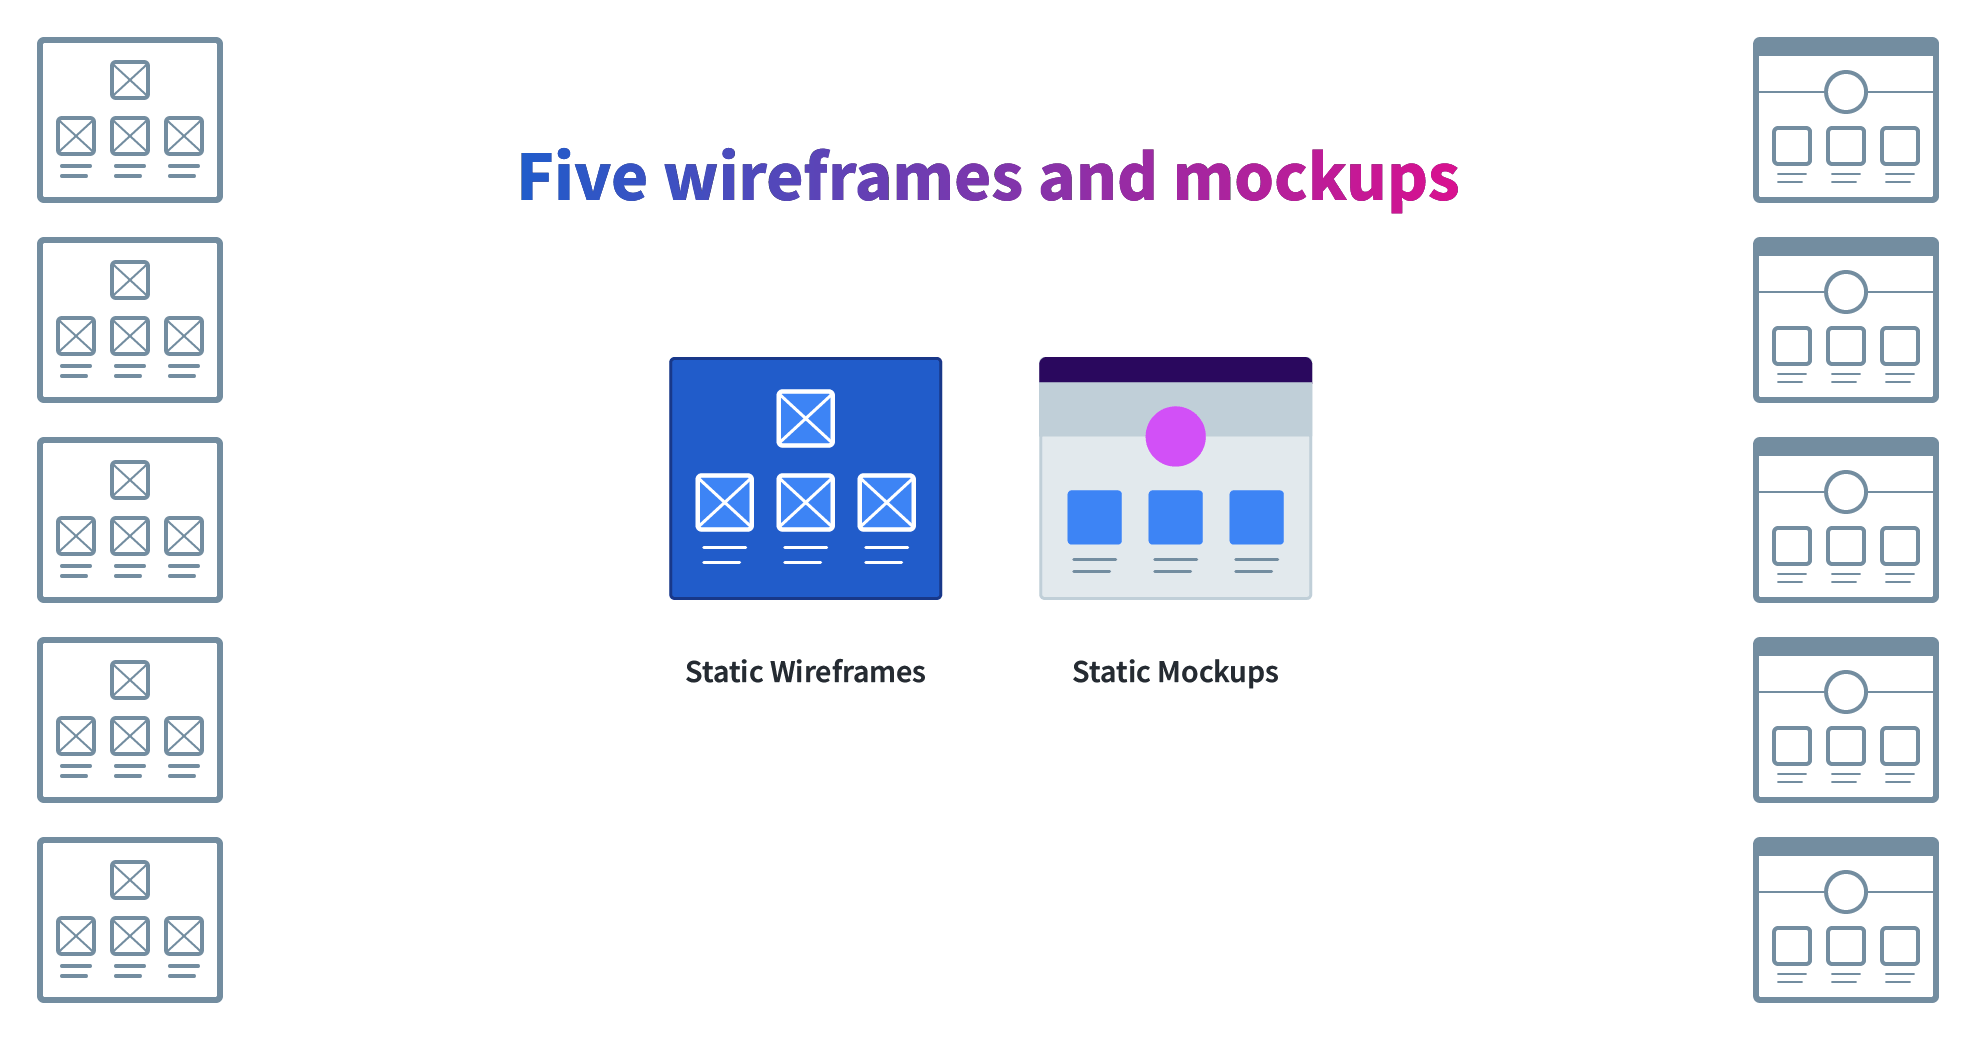 Five desktop wireframe icons on the left and five desktop wireframe icons on the right. In the middle, larger versions of the same wireframe and mockup icons are shown with the labels, 'Static Wireframes' and 'Static Designs'. The image is titled, 'Five wireframes and mockups.'